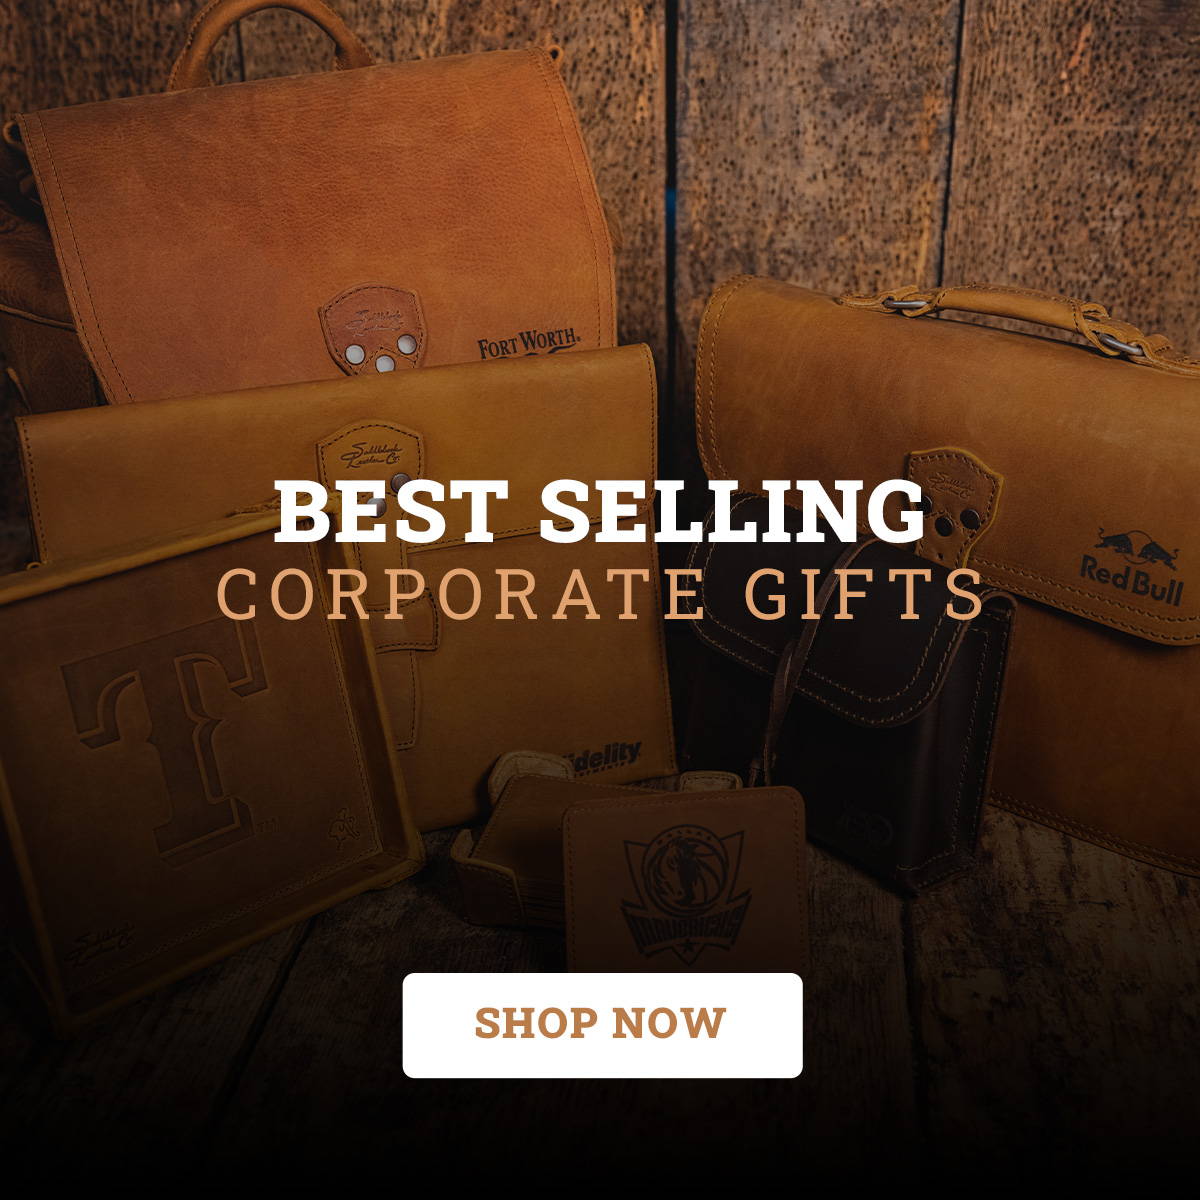 Best Selling Corporate Gifts